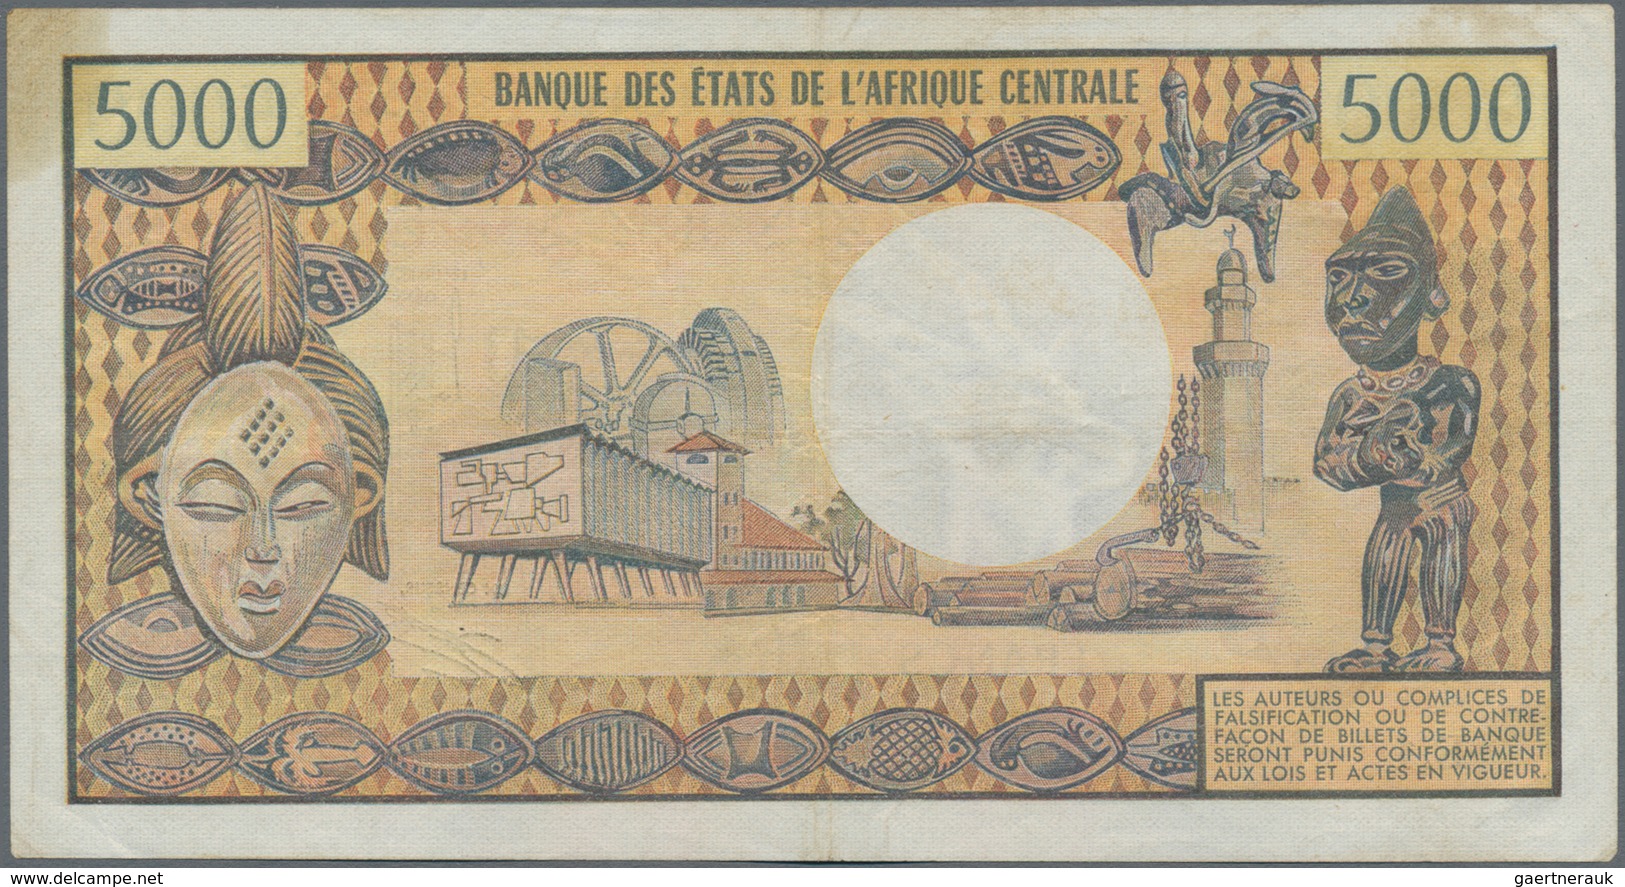 Chad / Tschad: Republique Du Tchad 5000 Francs ND(1974), P.4, Nice And Rare Note, Some Minor Stains - Tschad